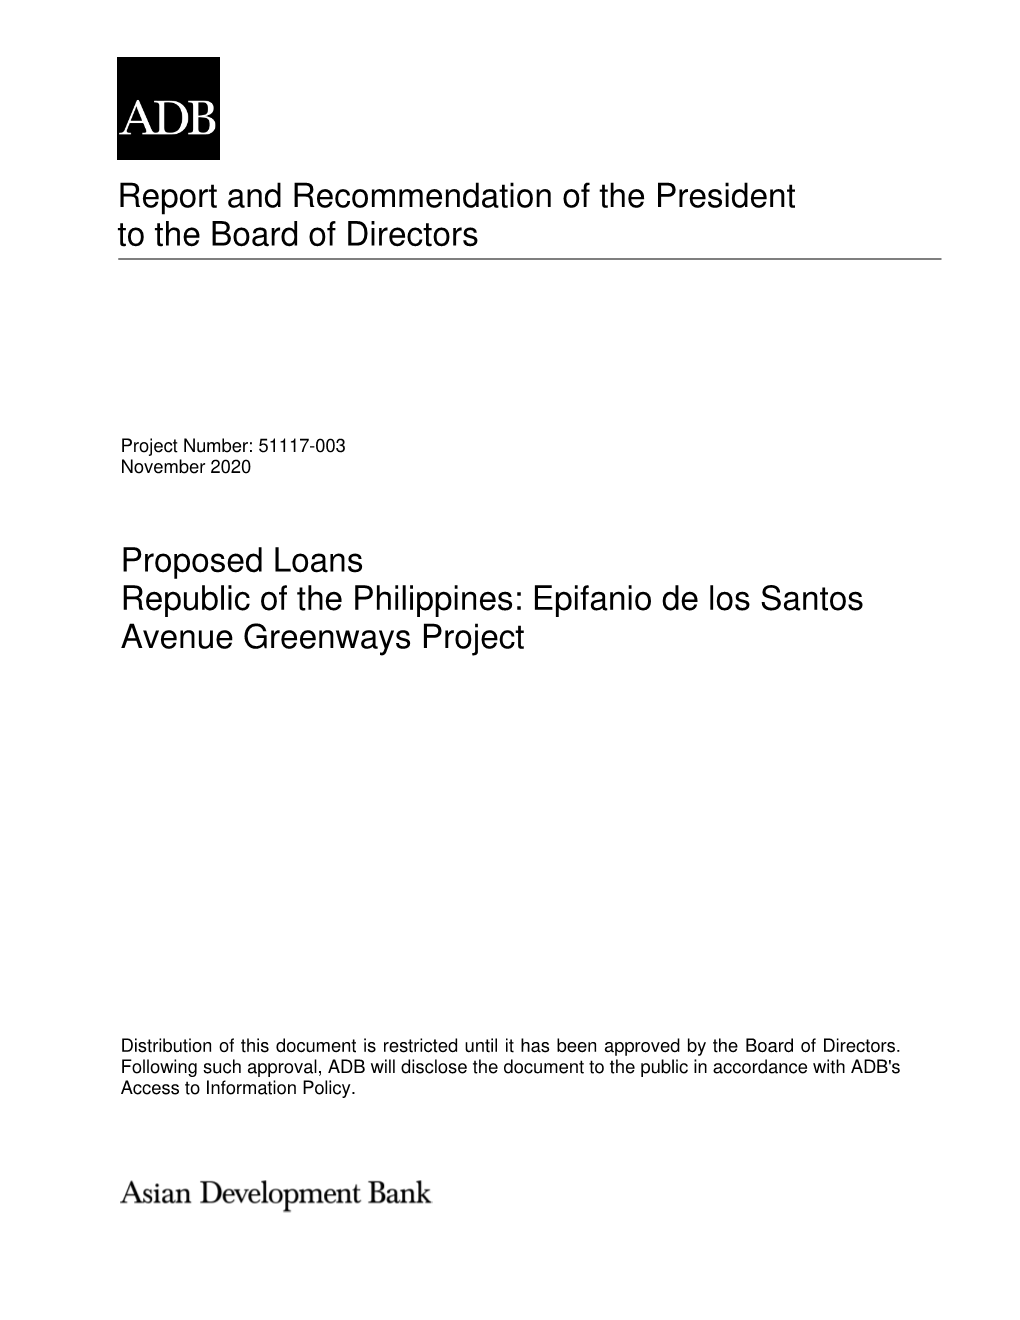 Epifanio De Los Santos Avenue Greenways Project: Report and Recommendation of the President